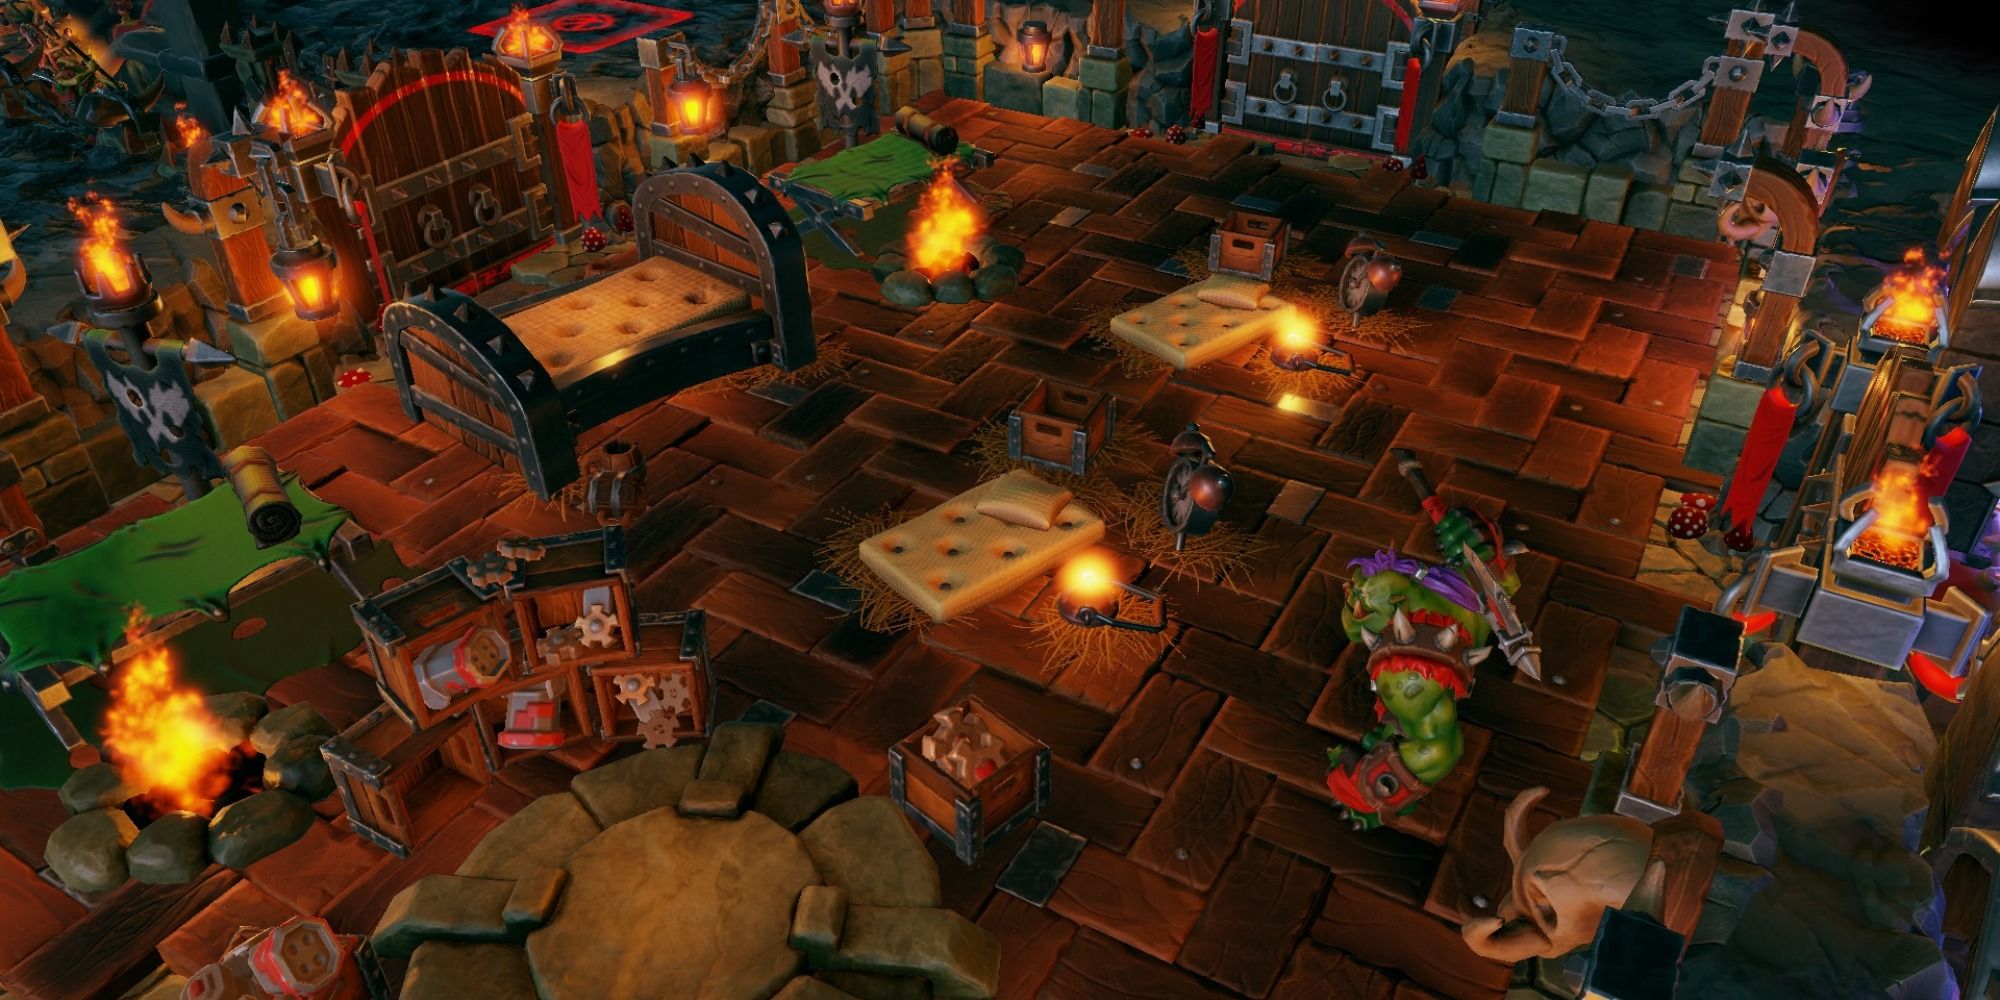 A monster in a lair in Dungeons 3